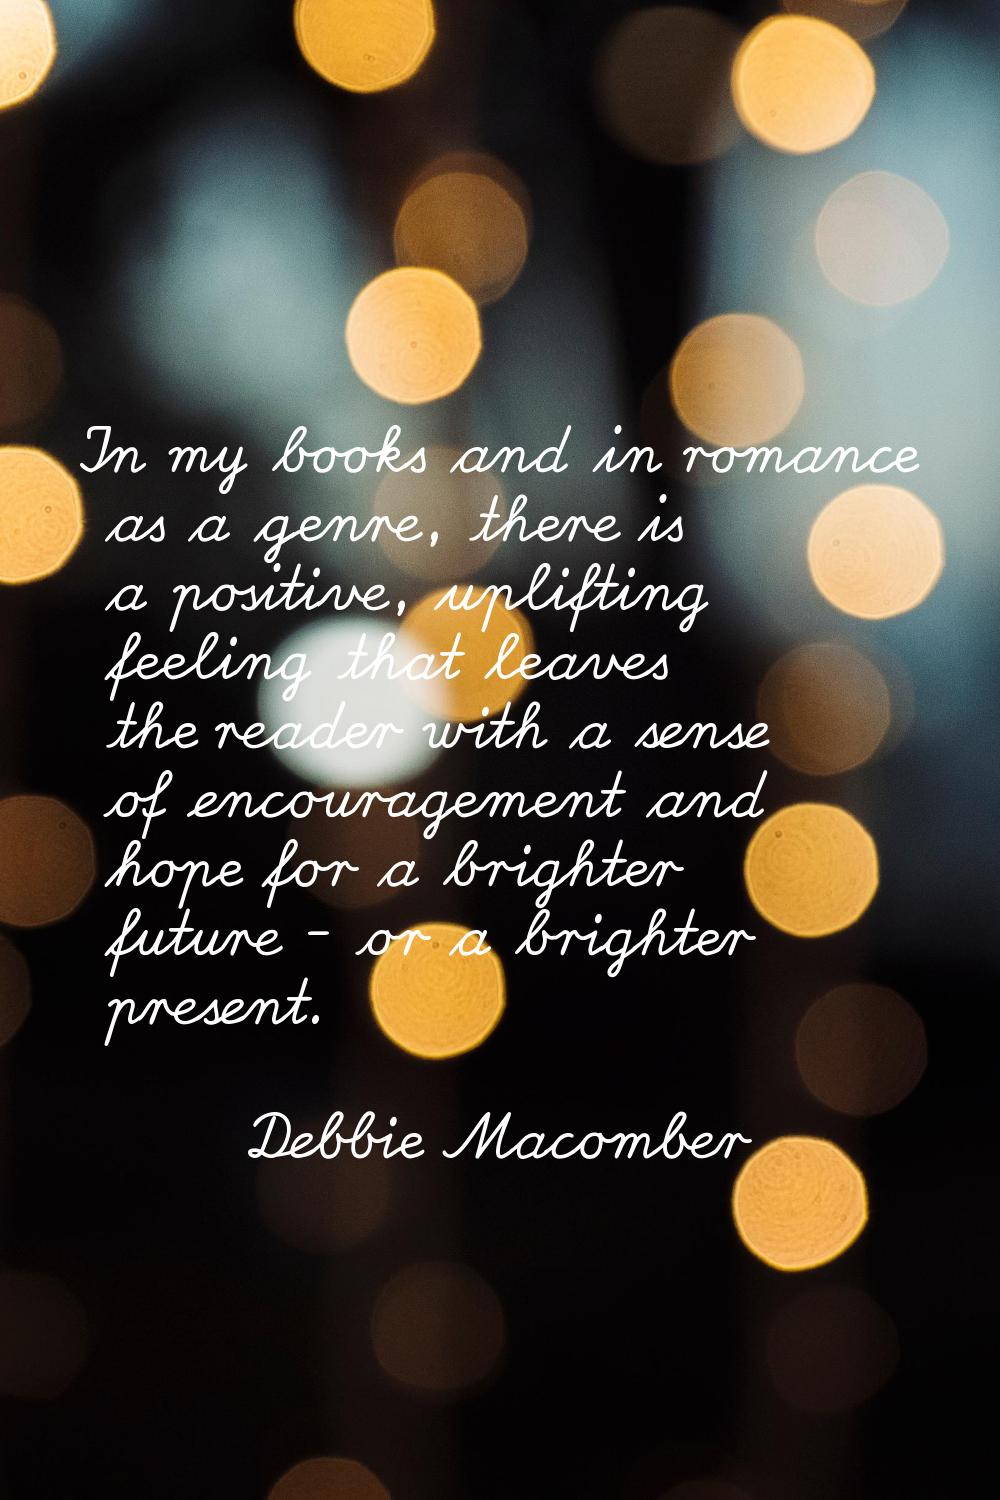 In my books and in romance as a genre, there is a positive, uplifting feeling that leaves the reade